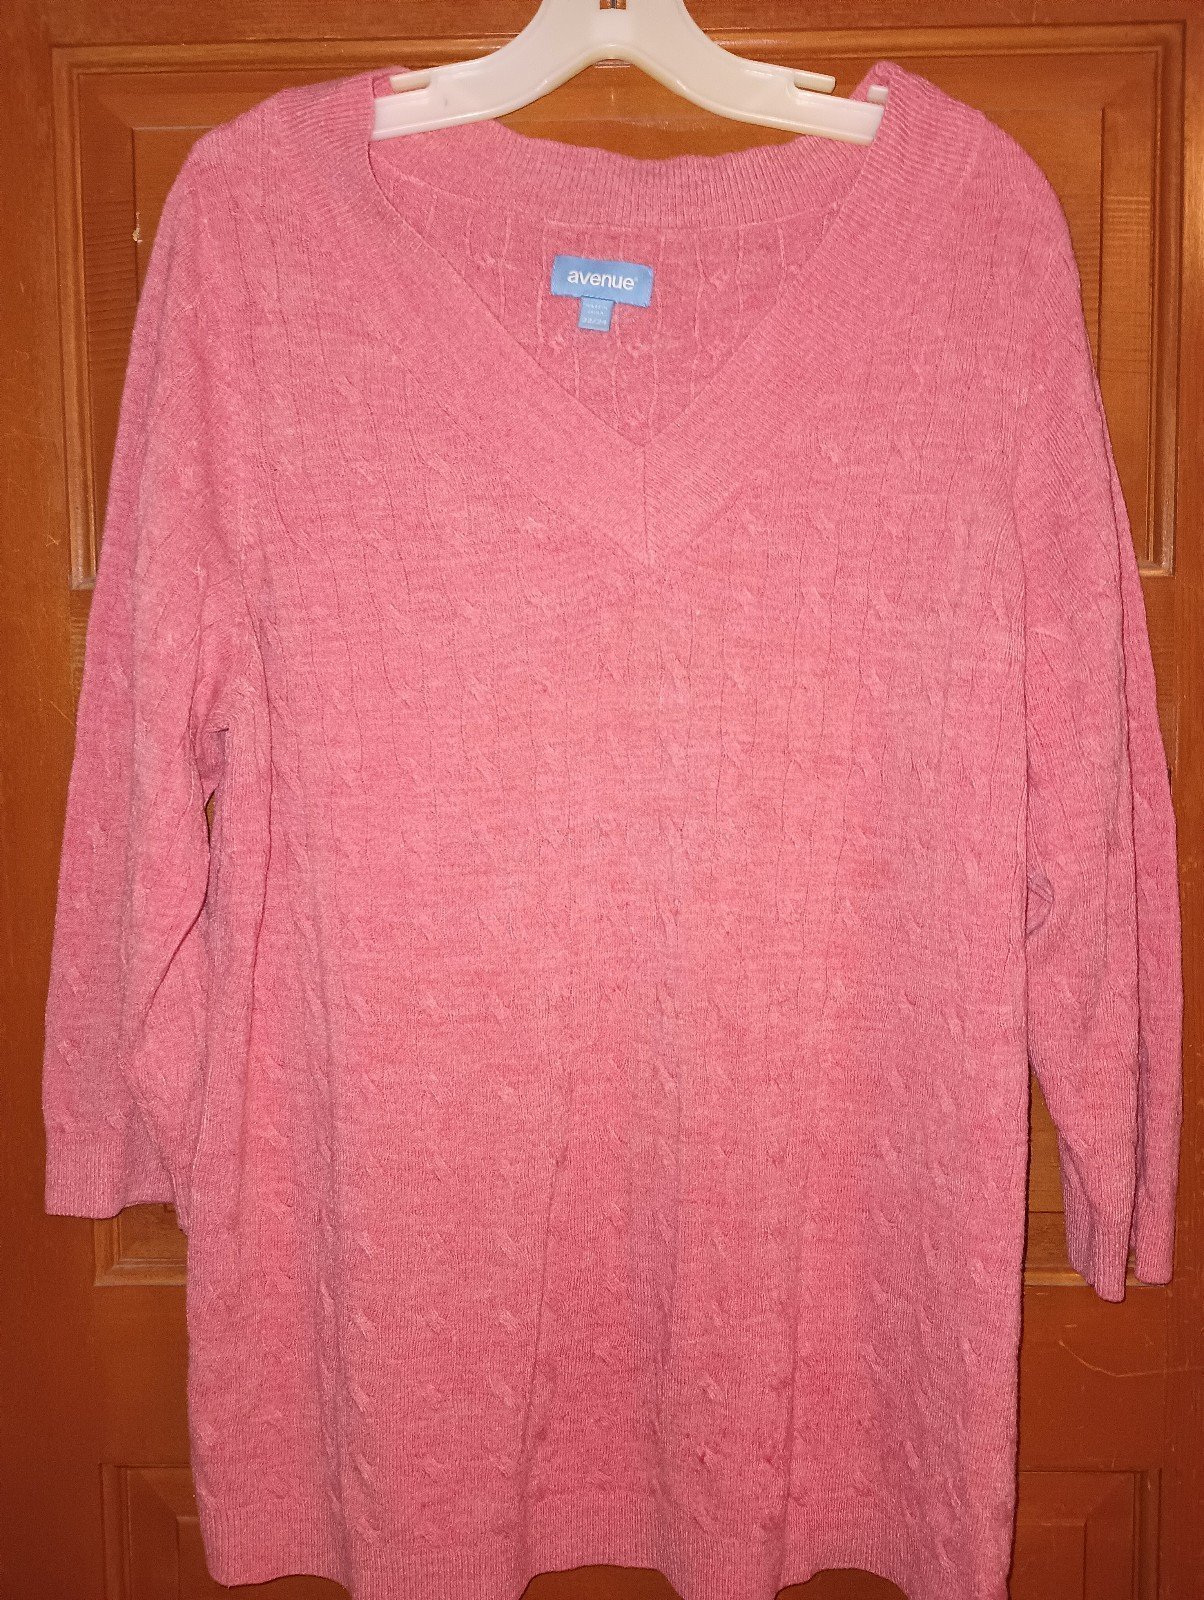 Simple Coral Sweater - Avenue - Size 3X IoiR0xoEQ Facto